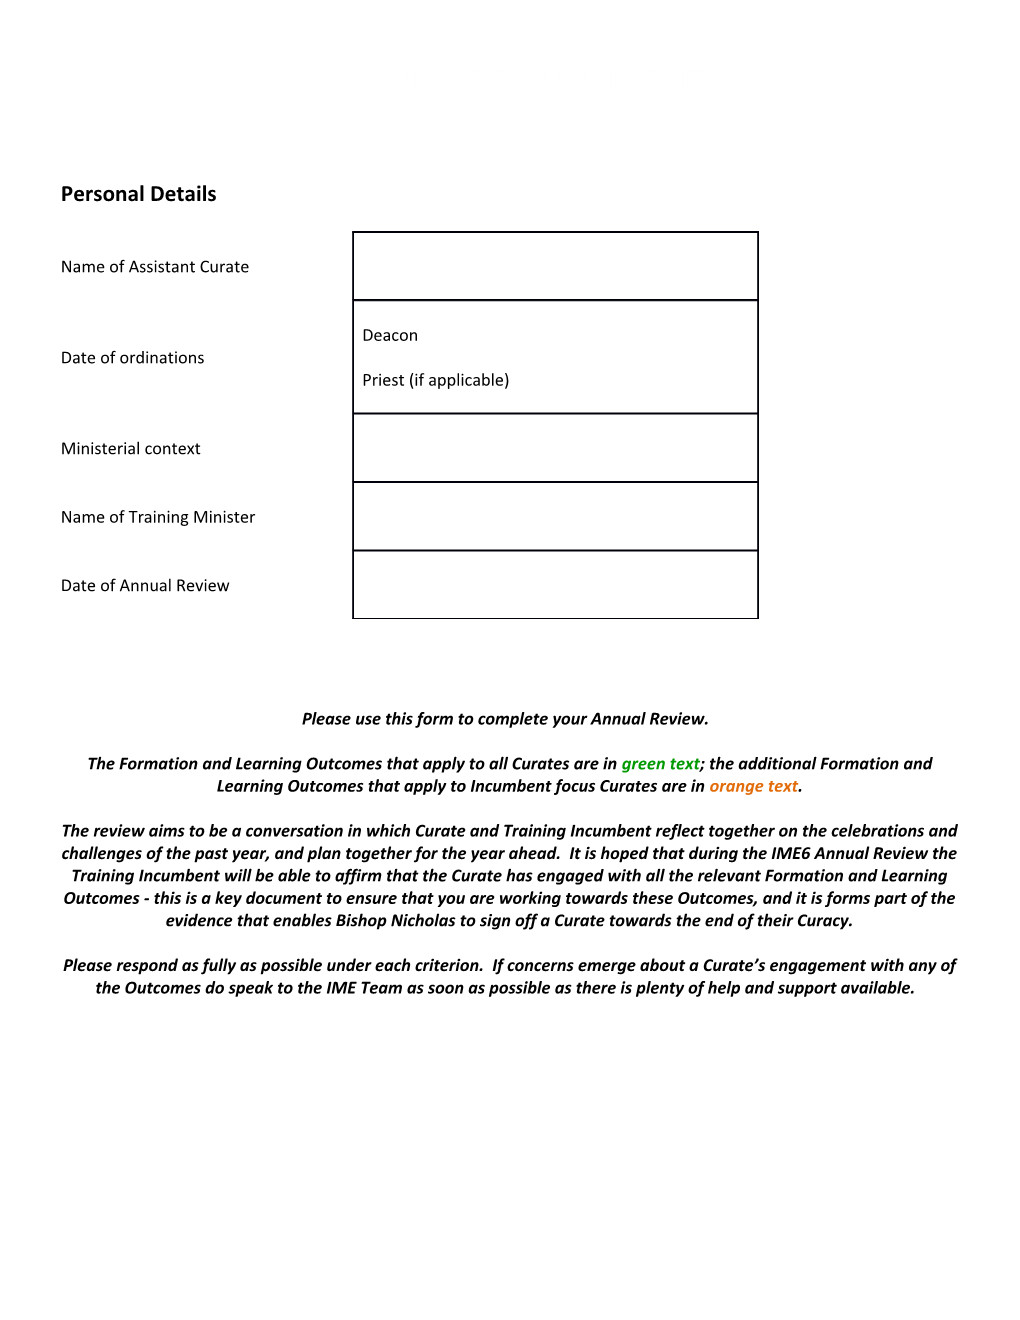 Please Use This Form to Complete Your Annual Review